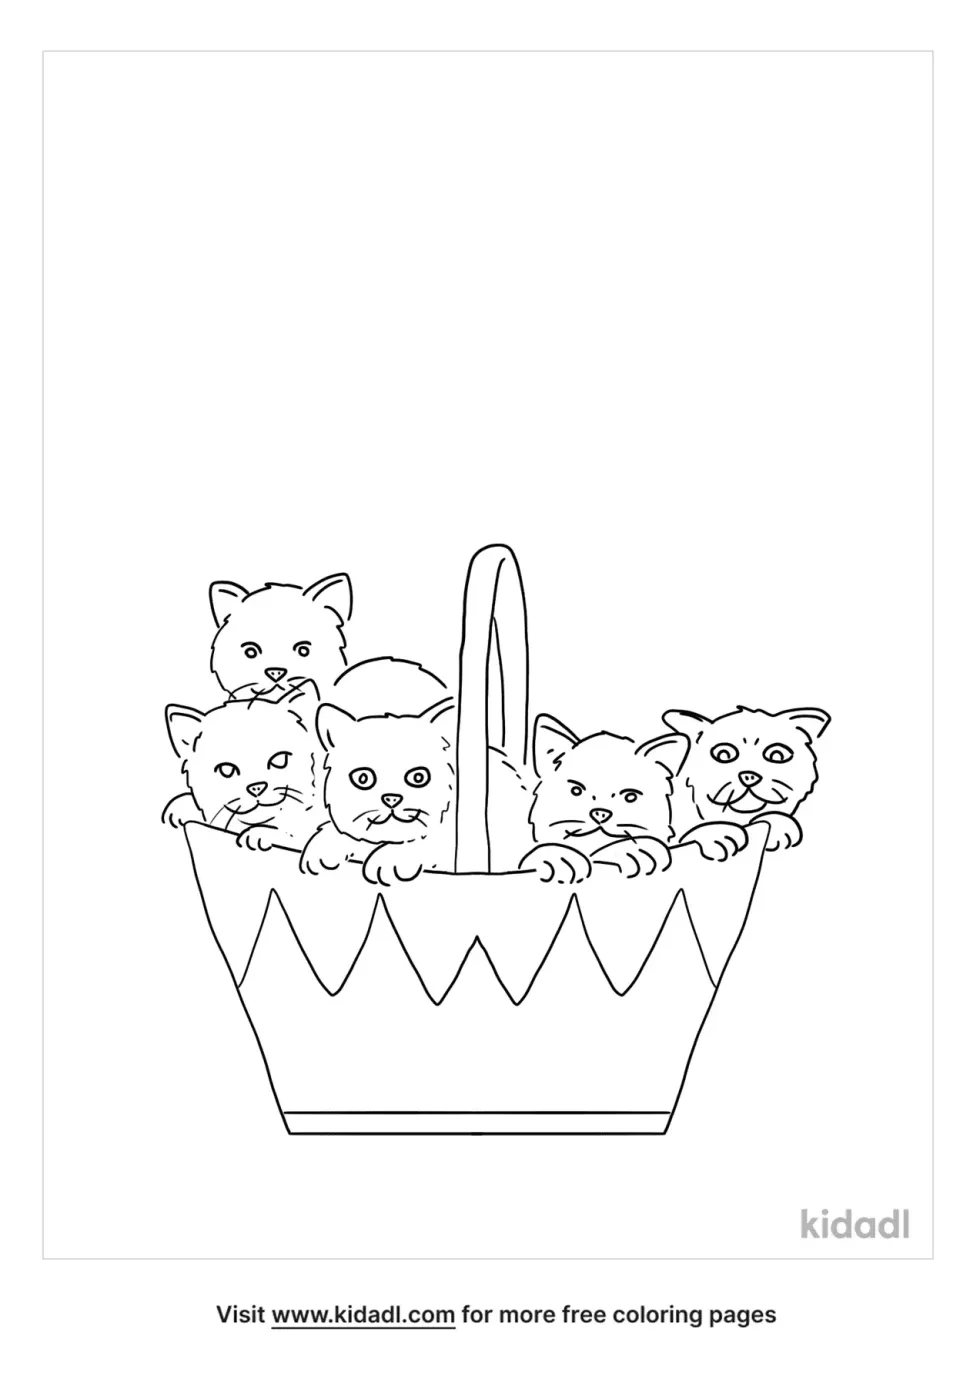 Five Cats In A Basket